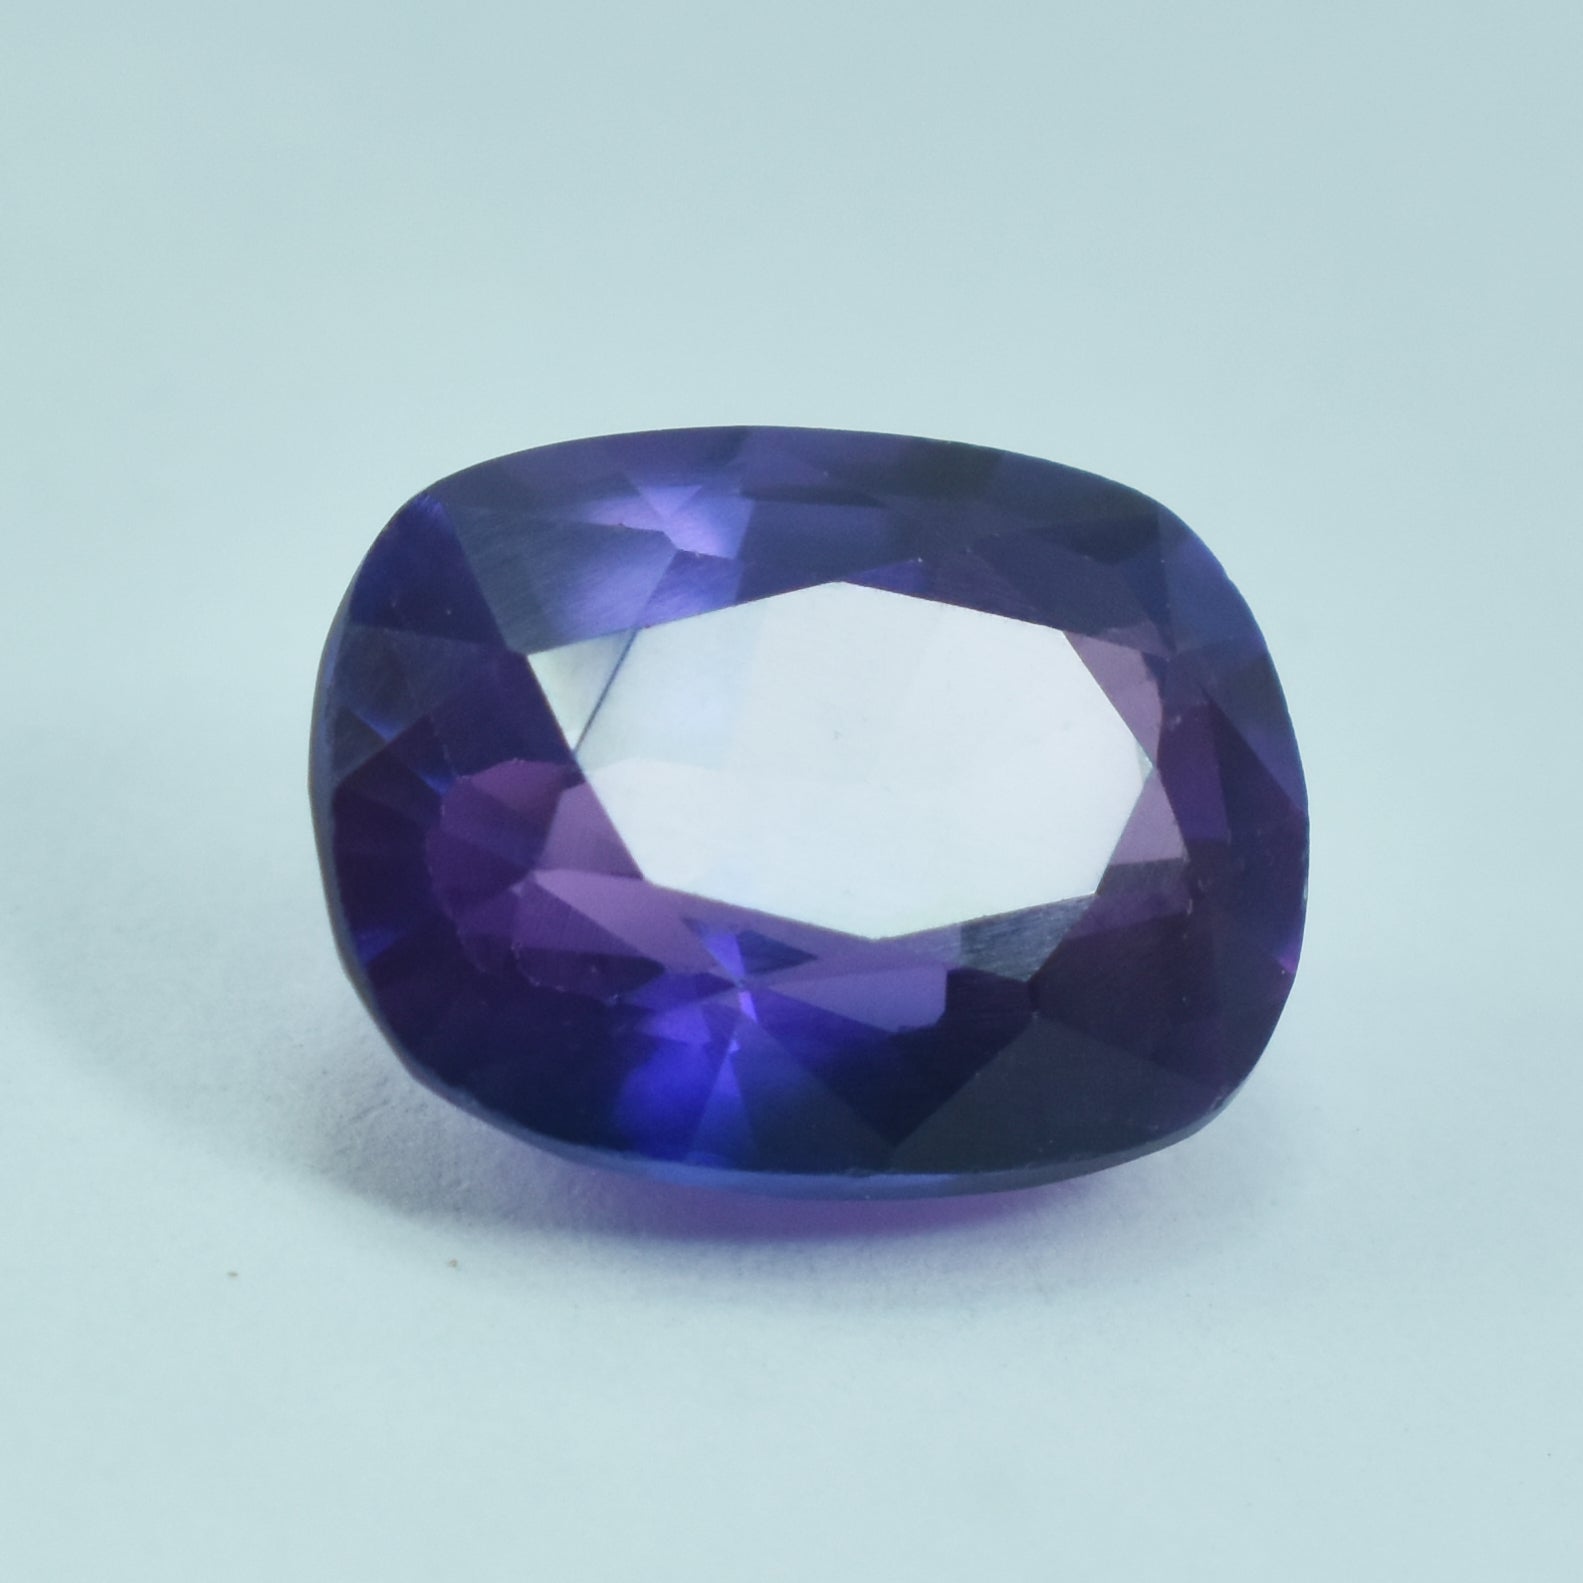 Jewelry Making Beautiful Sapphire 8.56 Carat Color Change Sapphire Natural Certified Loose Gemstone | Free Delivery Free Gift | Gift For Her